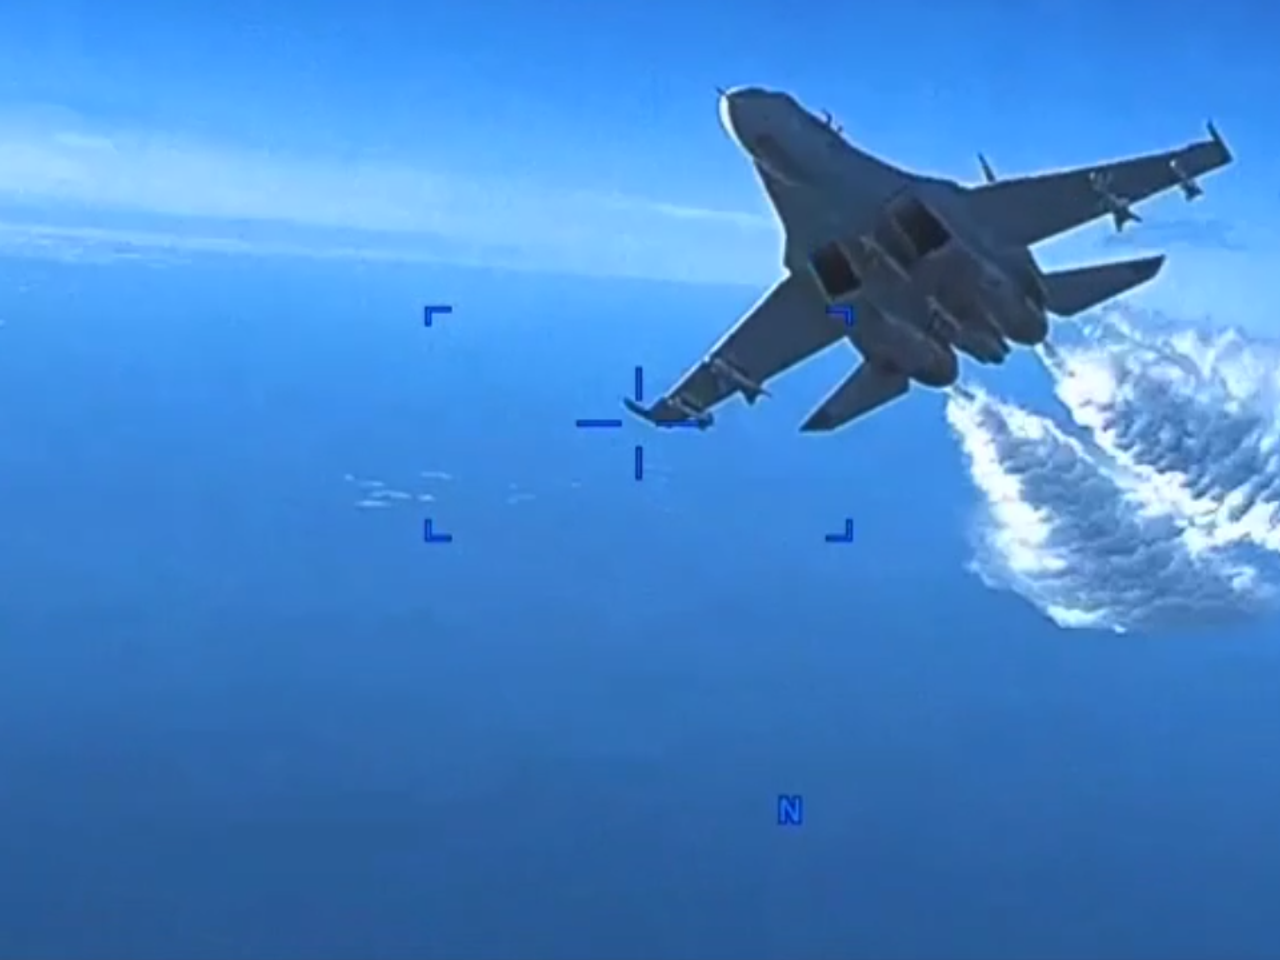 Russian Su-27 Takes to Air After US Drone Approaches Border